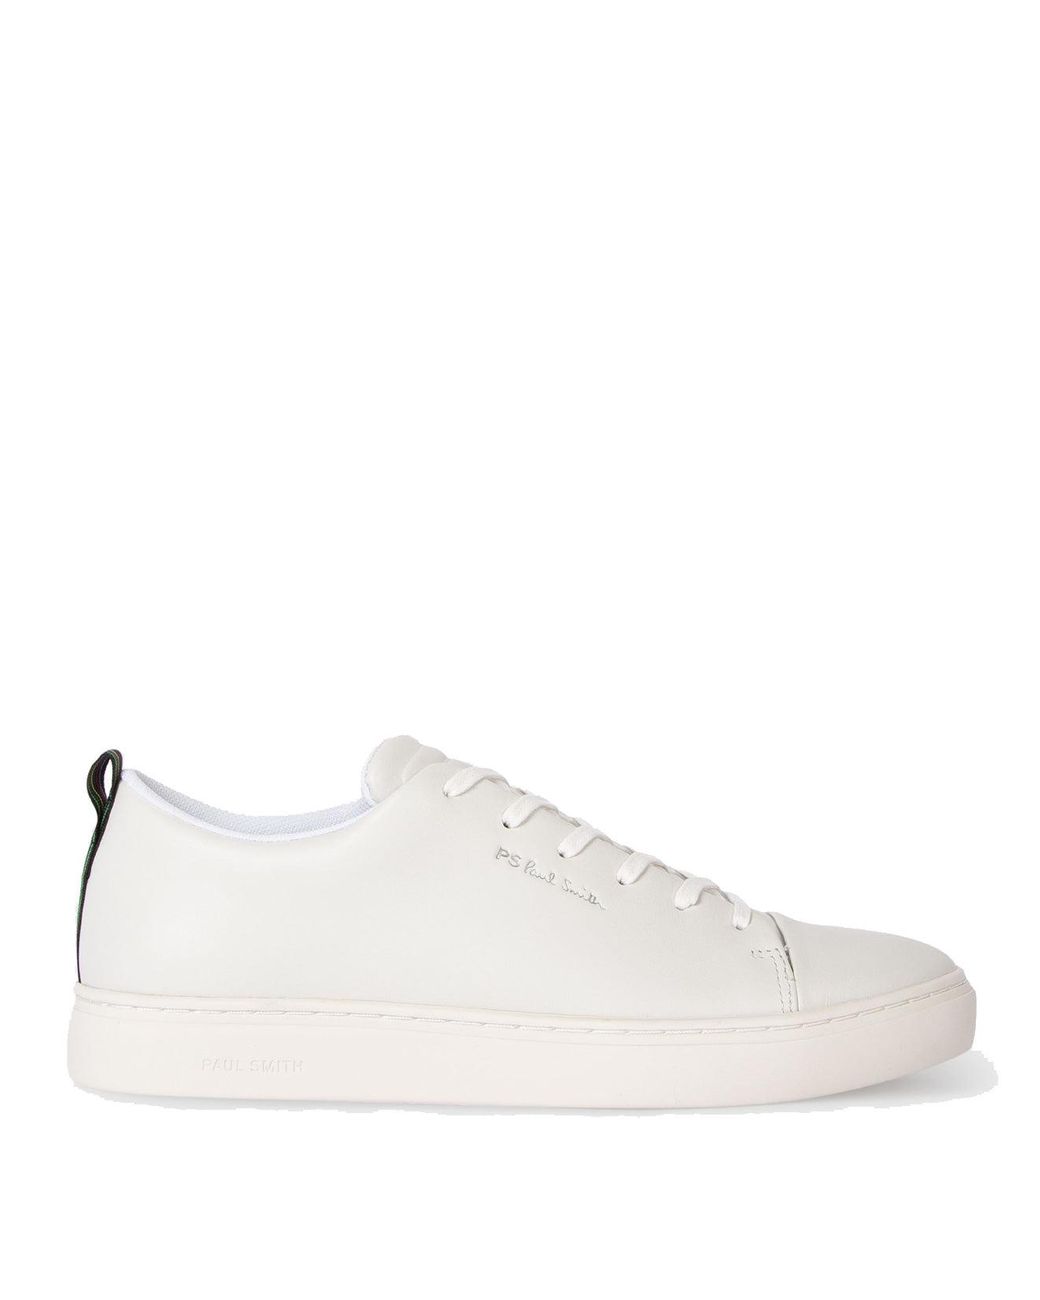 Paul Smith Lee Trainers in White for Men | Lyst